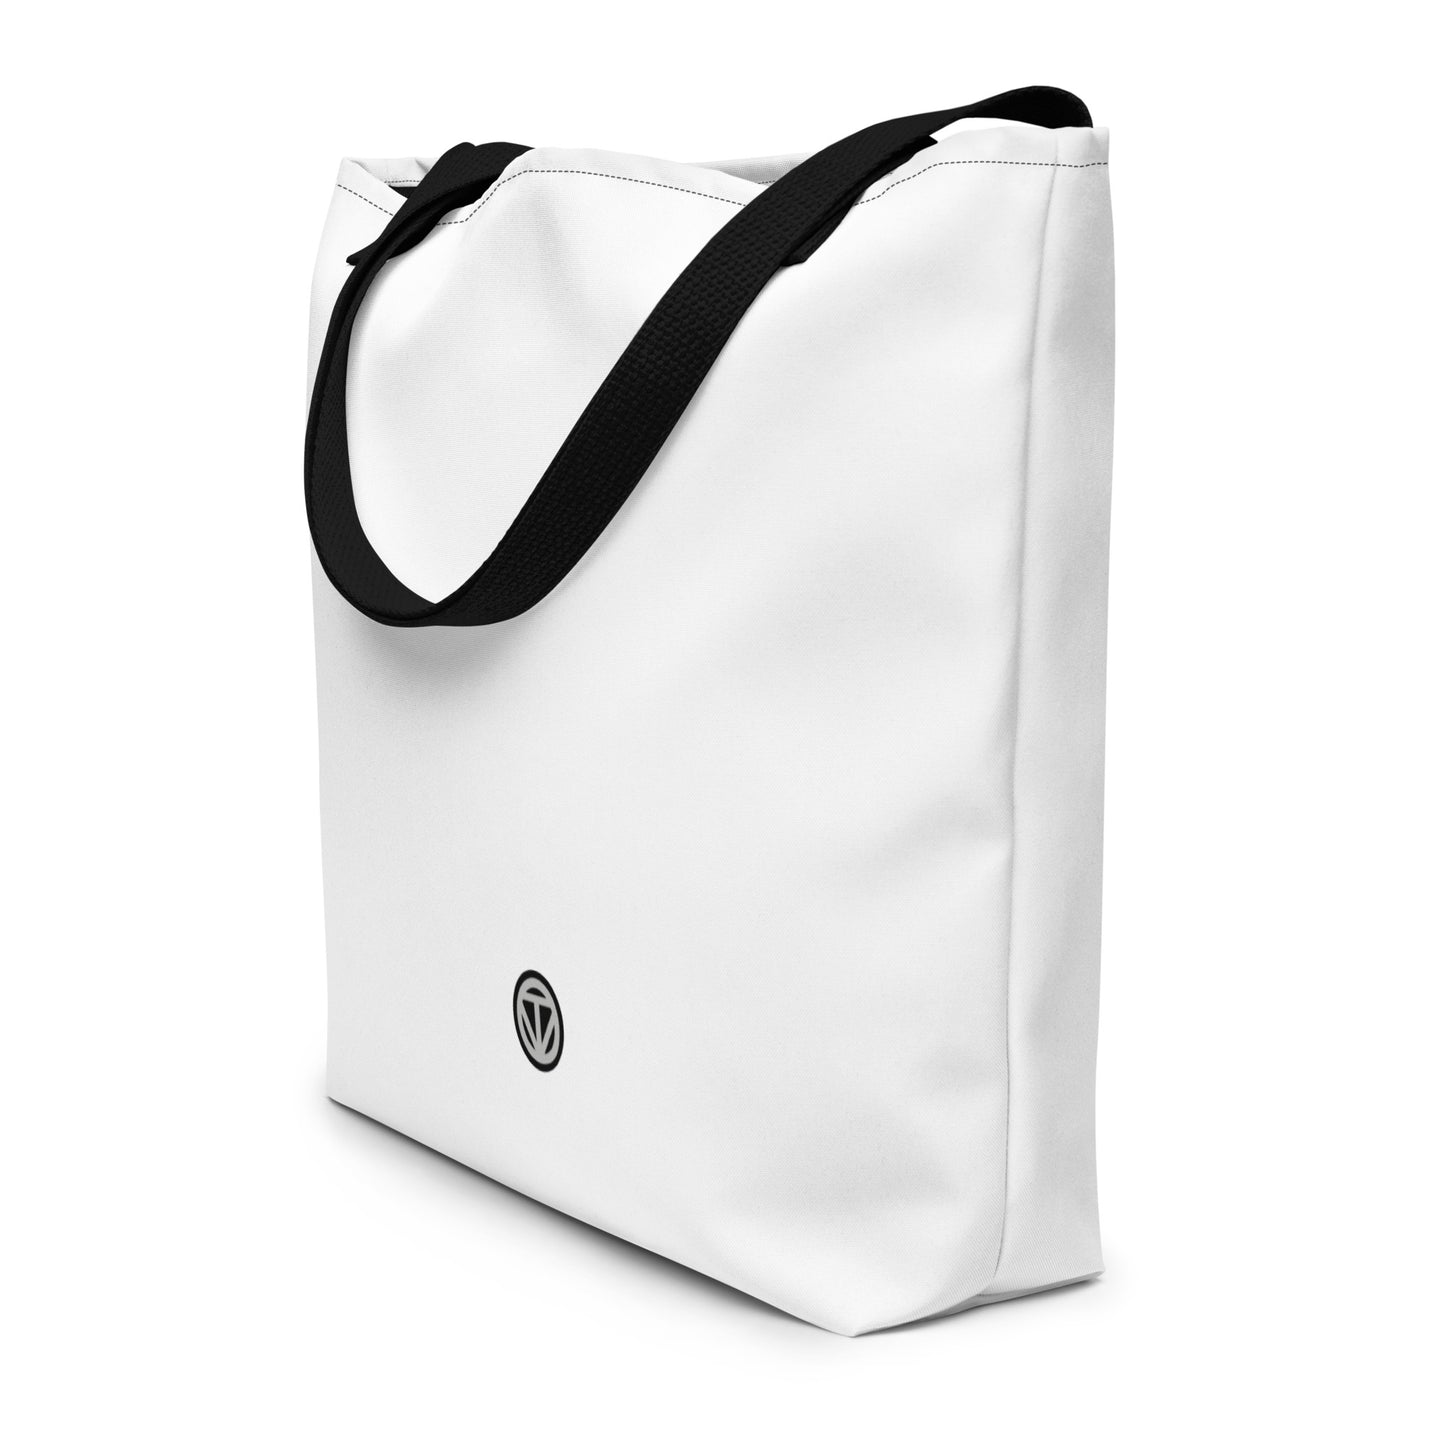 TIME OF VIBES - Large Tote Bag (White) - €45.00